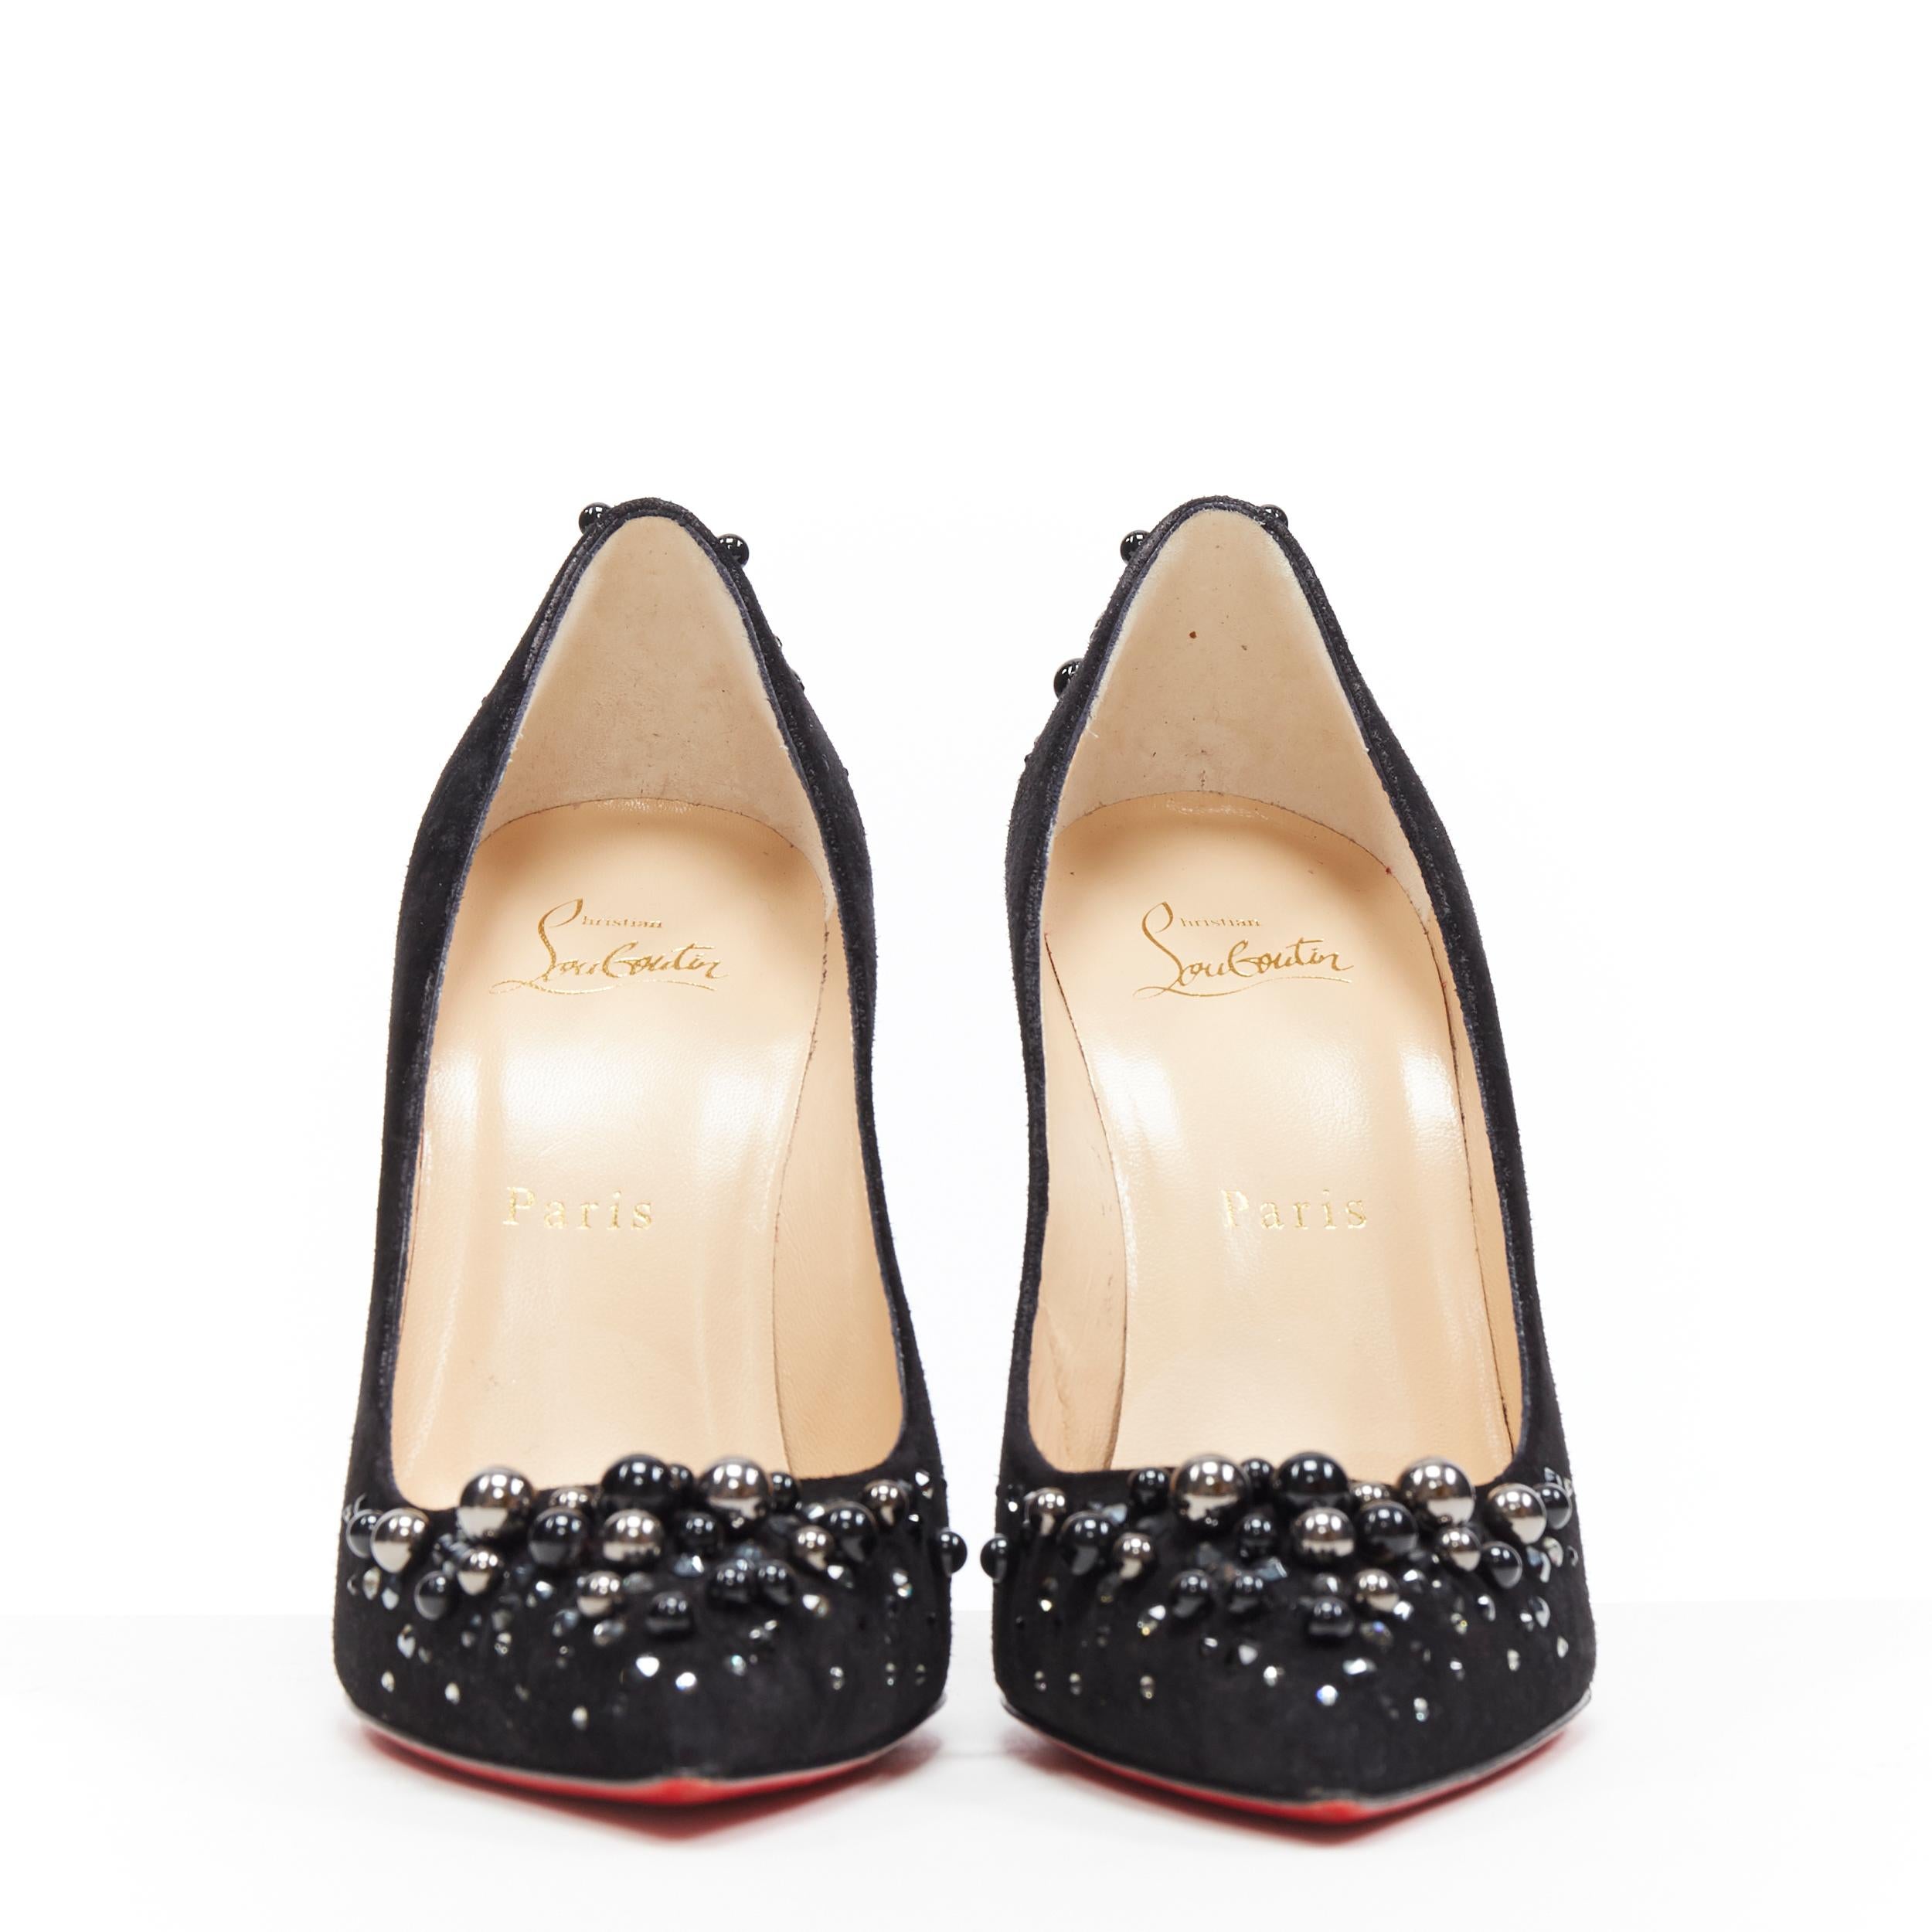 Black CHRISTIAN LOUBOUTIN Candidate 100 black suede pearl strass pointy pump EU37.5